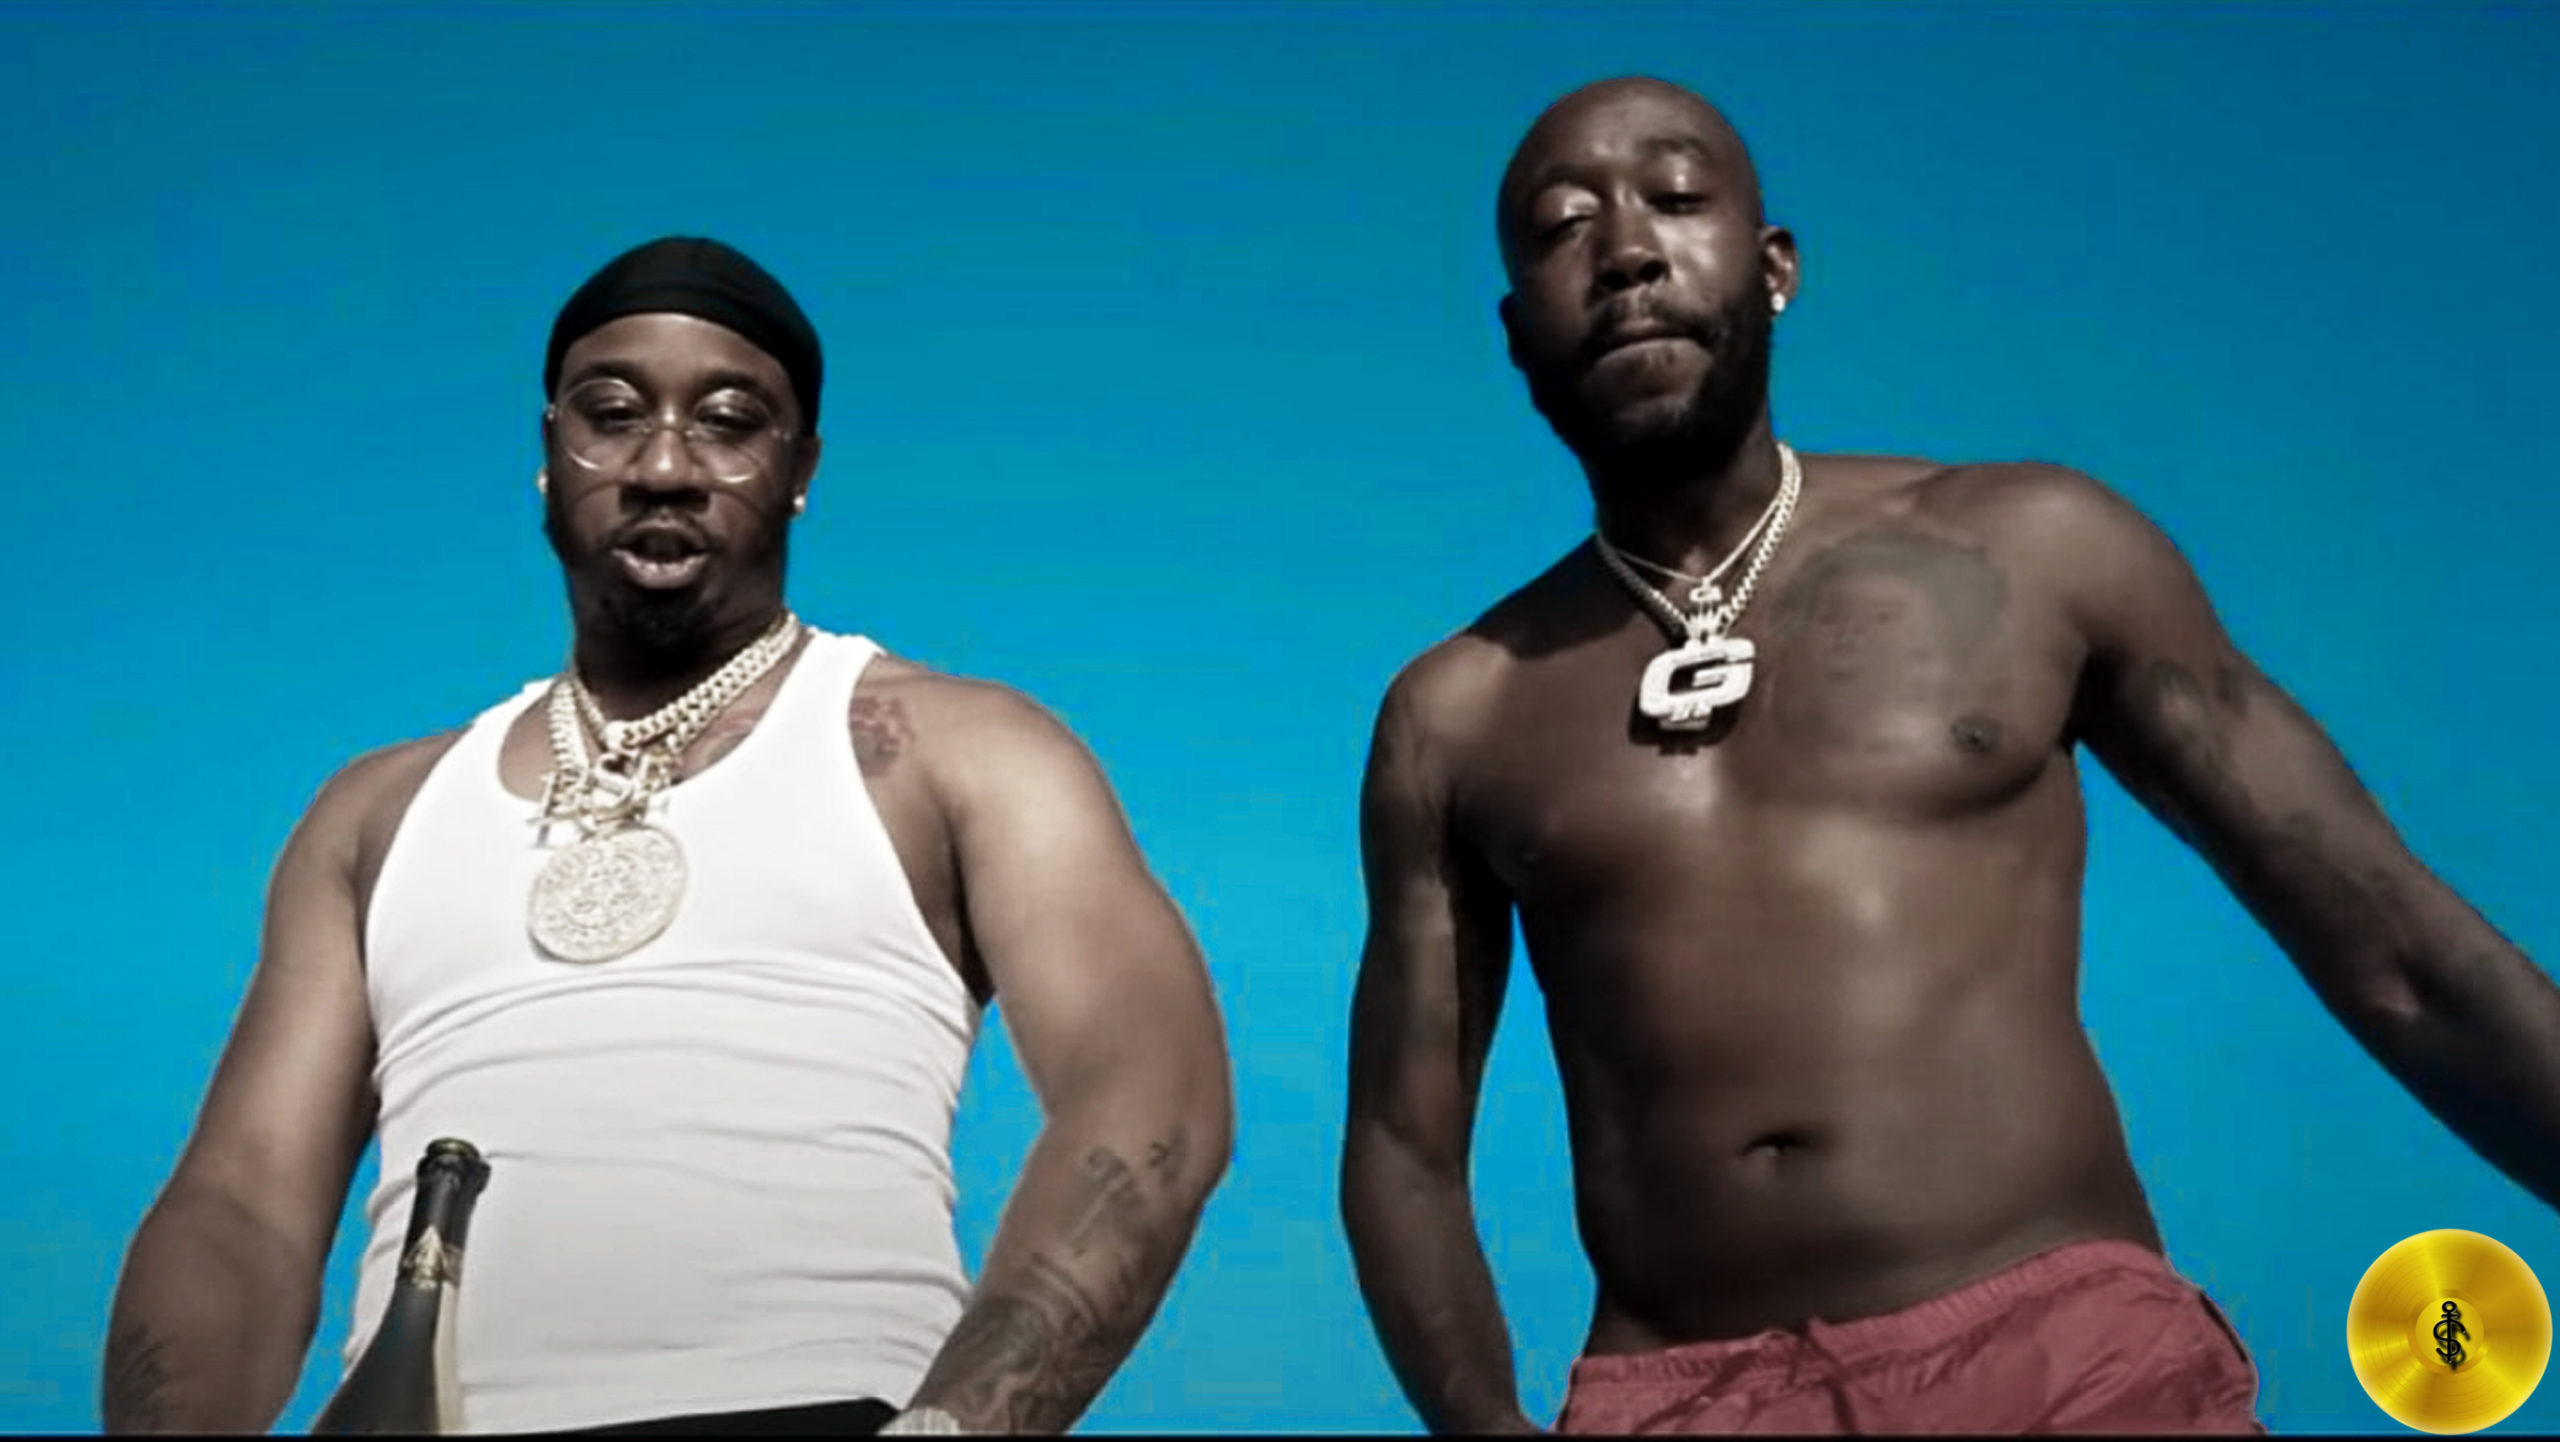 Why the Freddie Gibbs & Benny beef is wack…